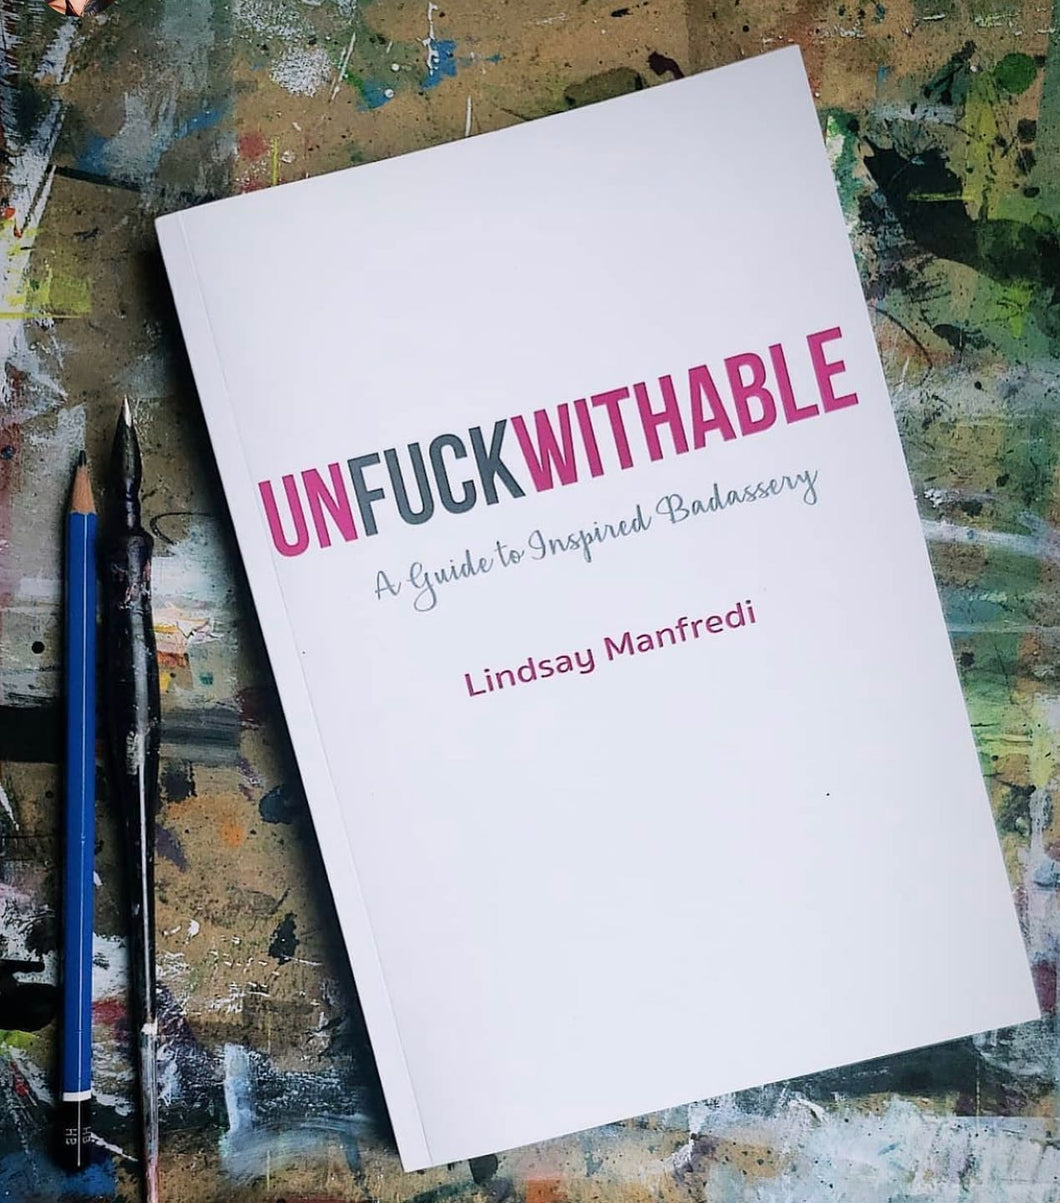 UNFUCKWITHABLE: A GUIDE TO INSPIRED BADASSERY (Signed Copy)